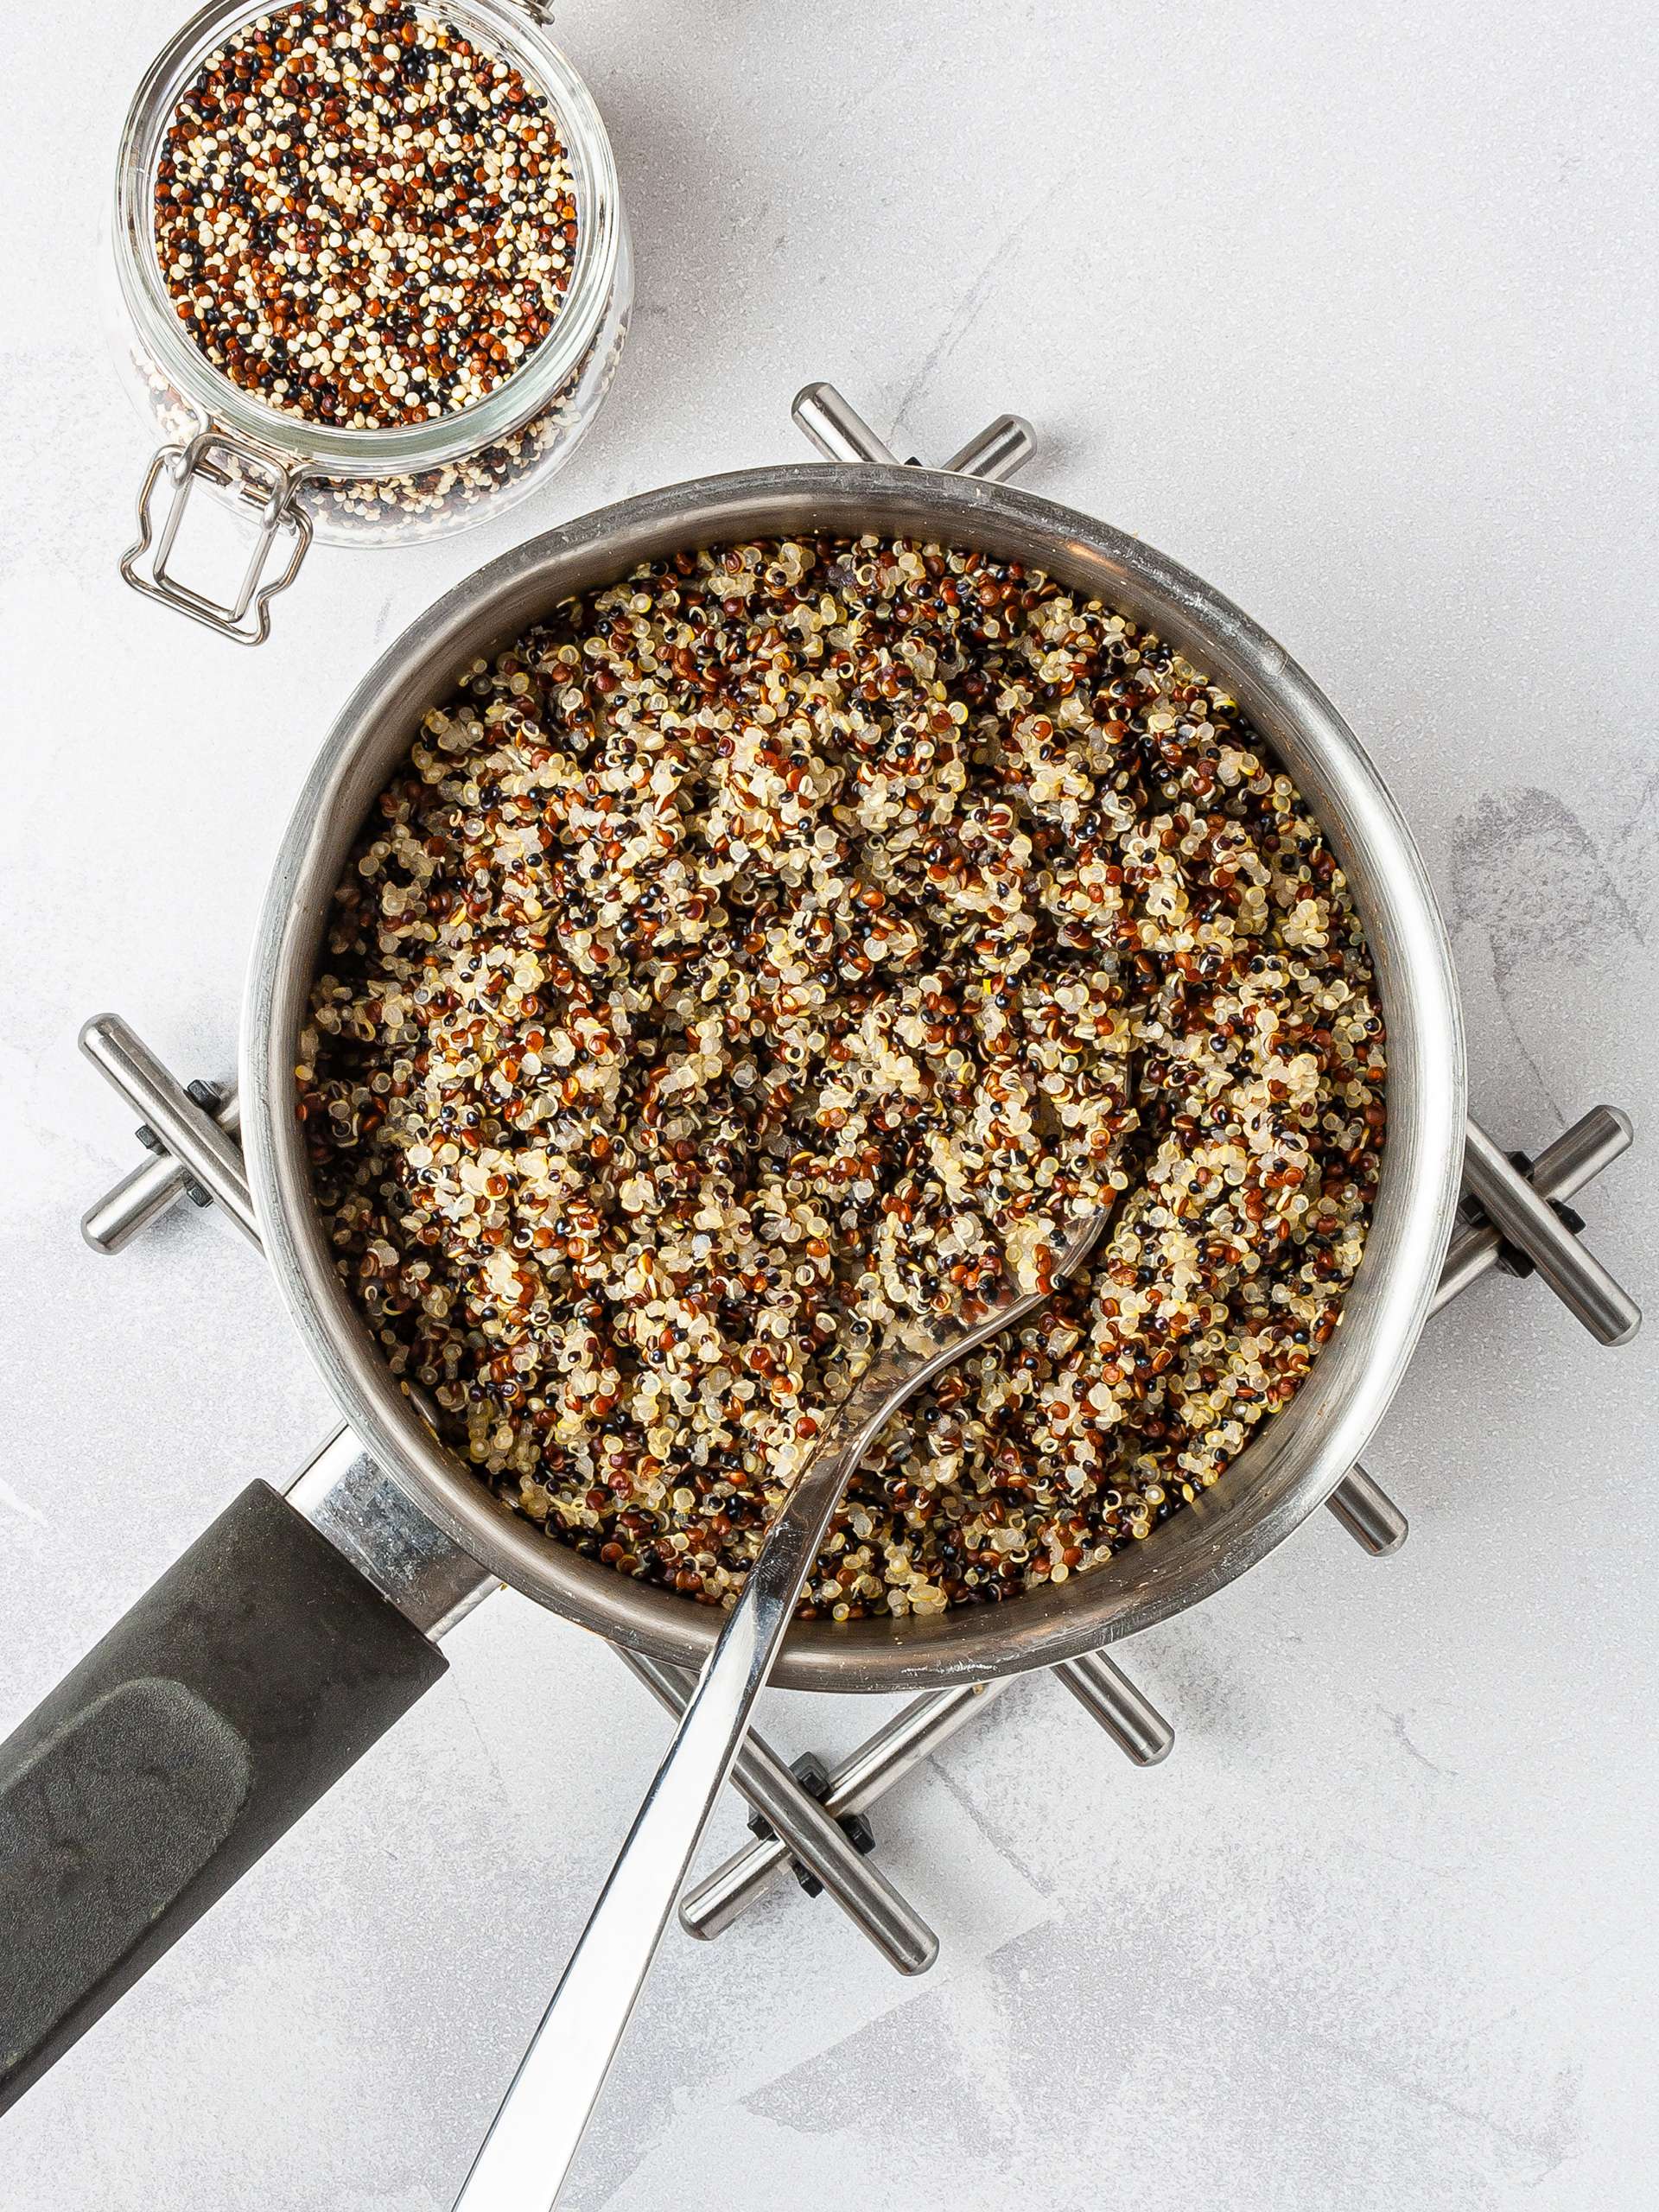 Cooked quinoa in a pan.